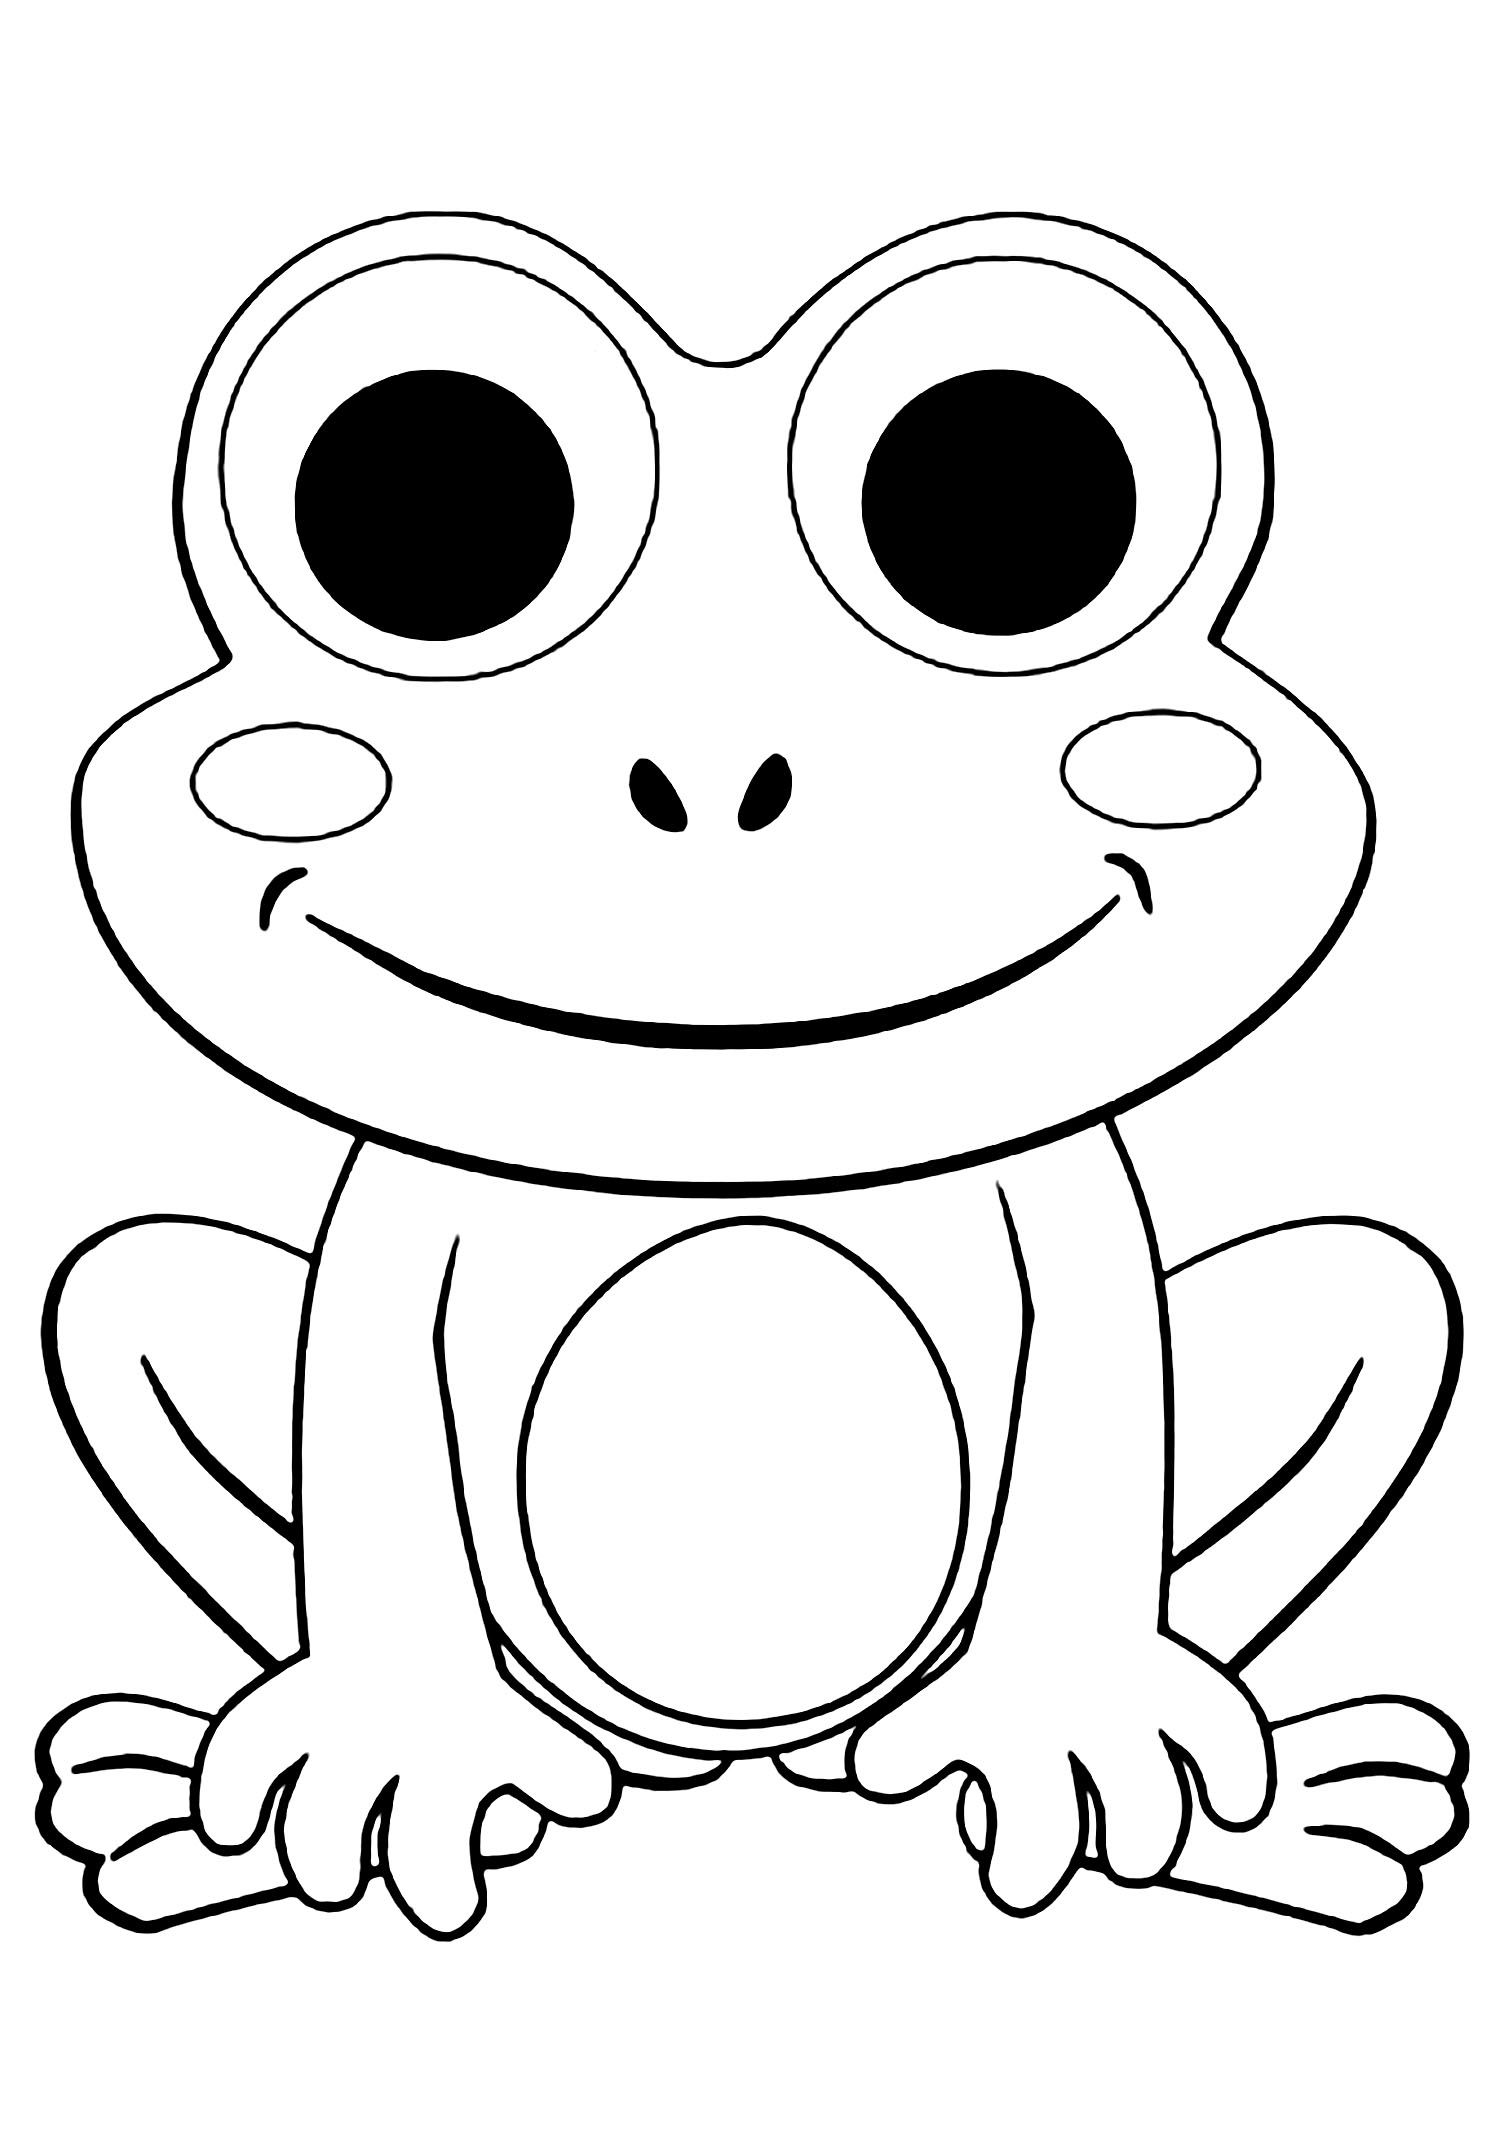 Coloring pages frogs printable